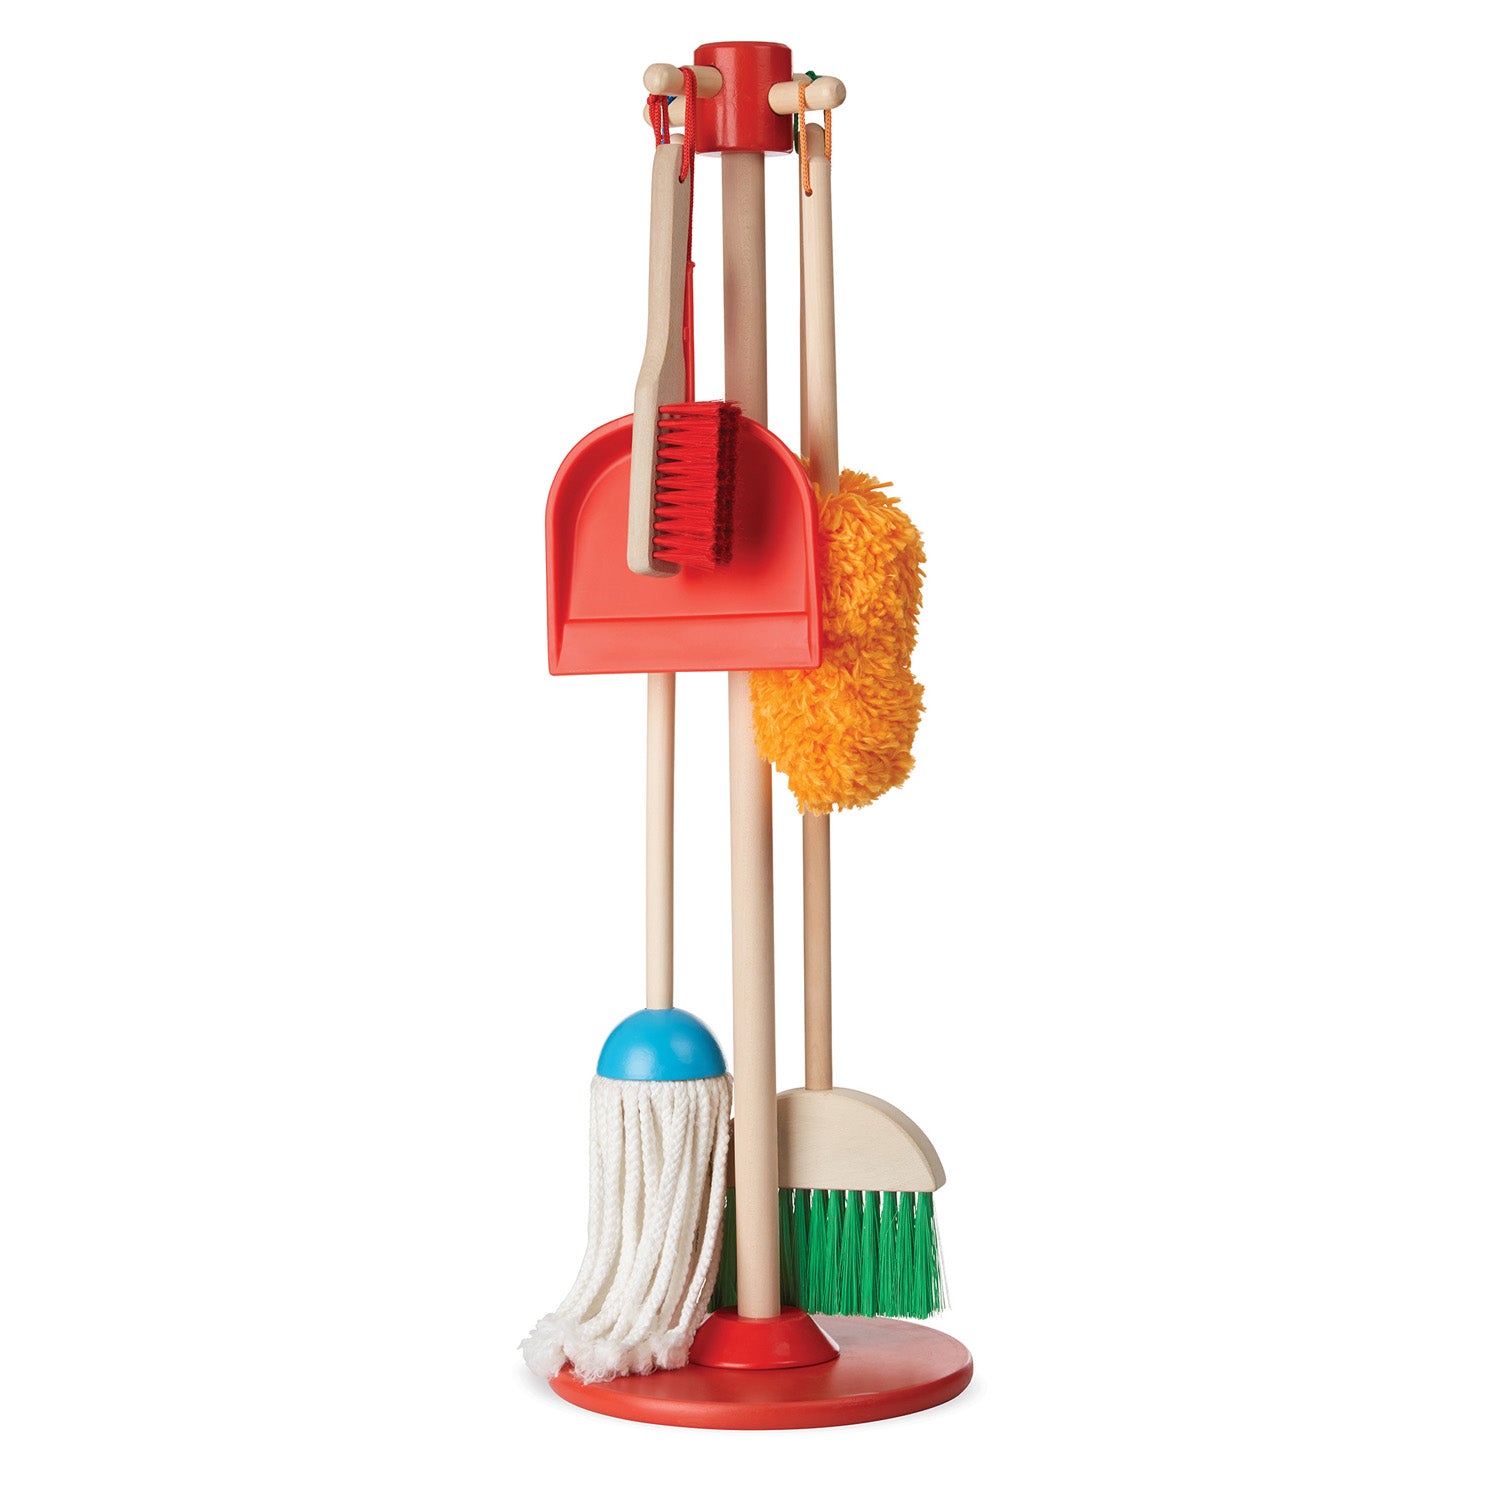 Mud Pie 4-Piece Cleaning Toy Set for Kids